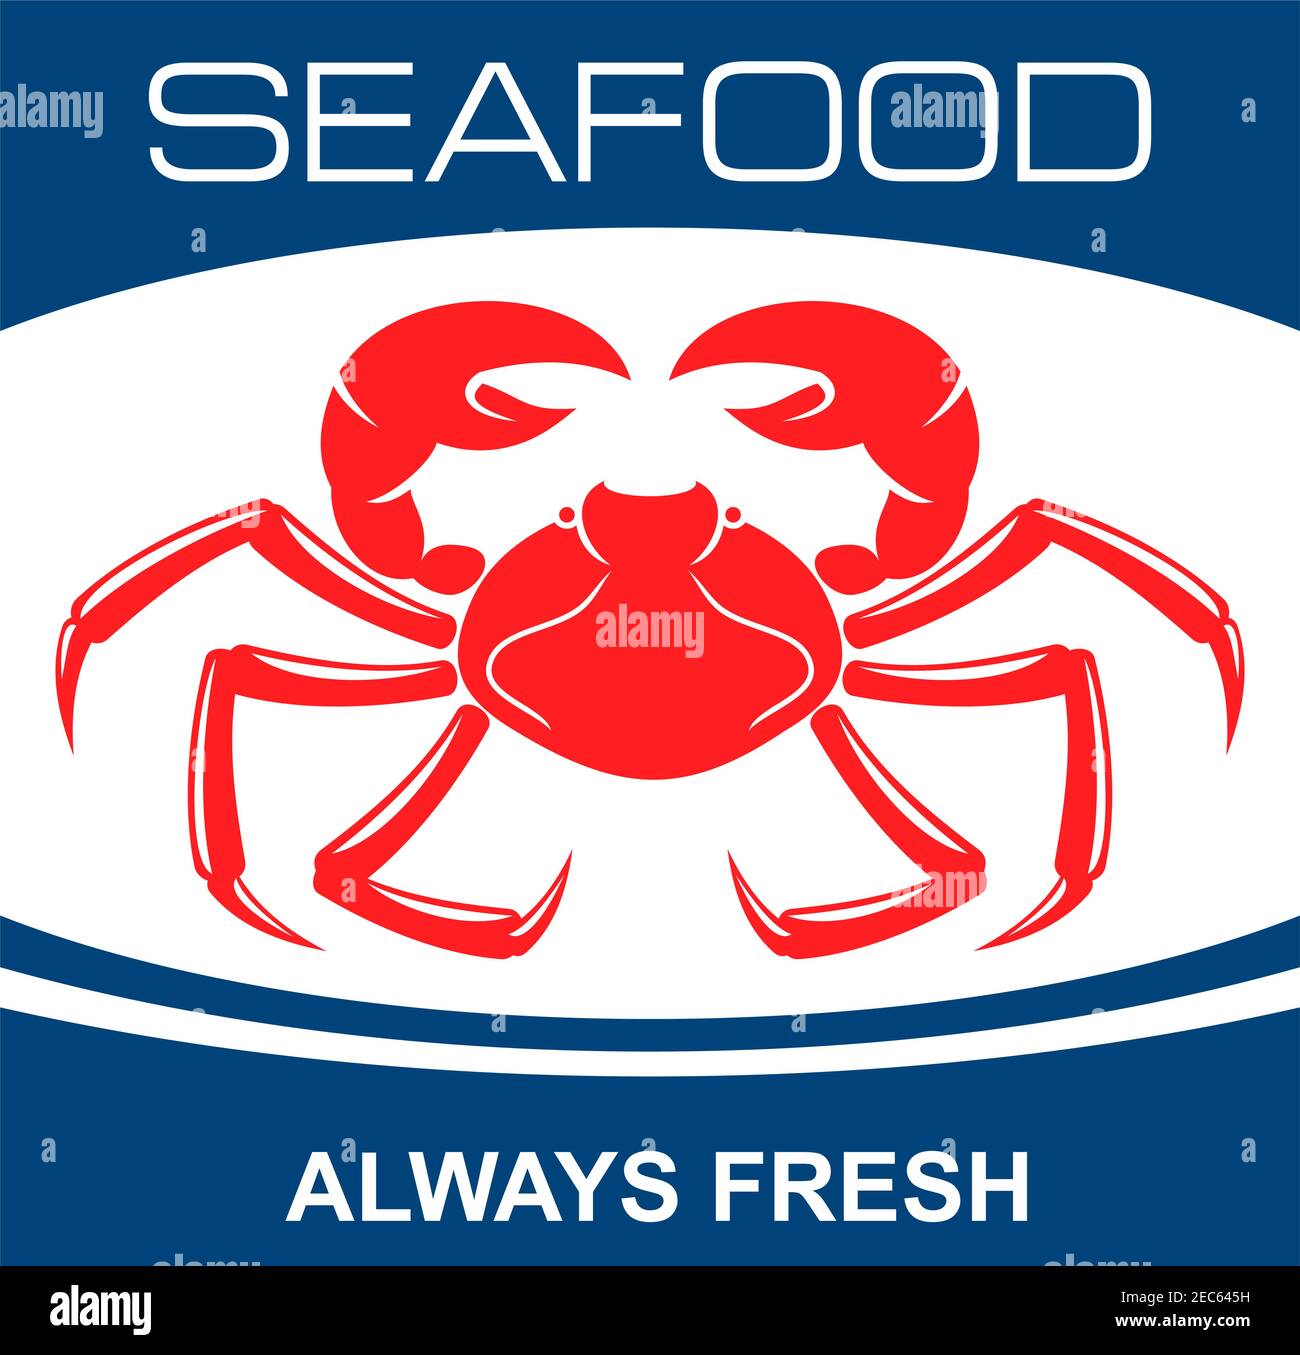 Fresh seafood bar badge design template with red symbol of wild atlantic snow crab. Great for kitchen accessories or food packaging design Stock Vector